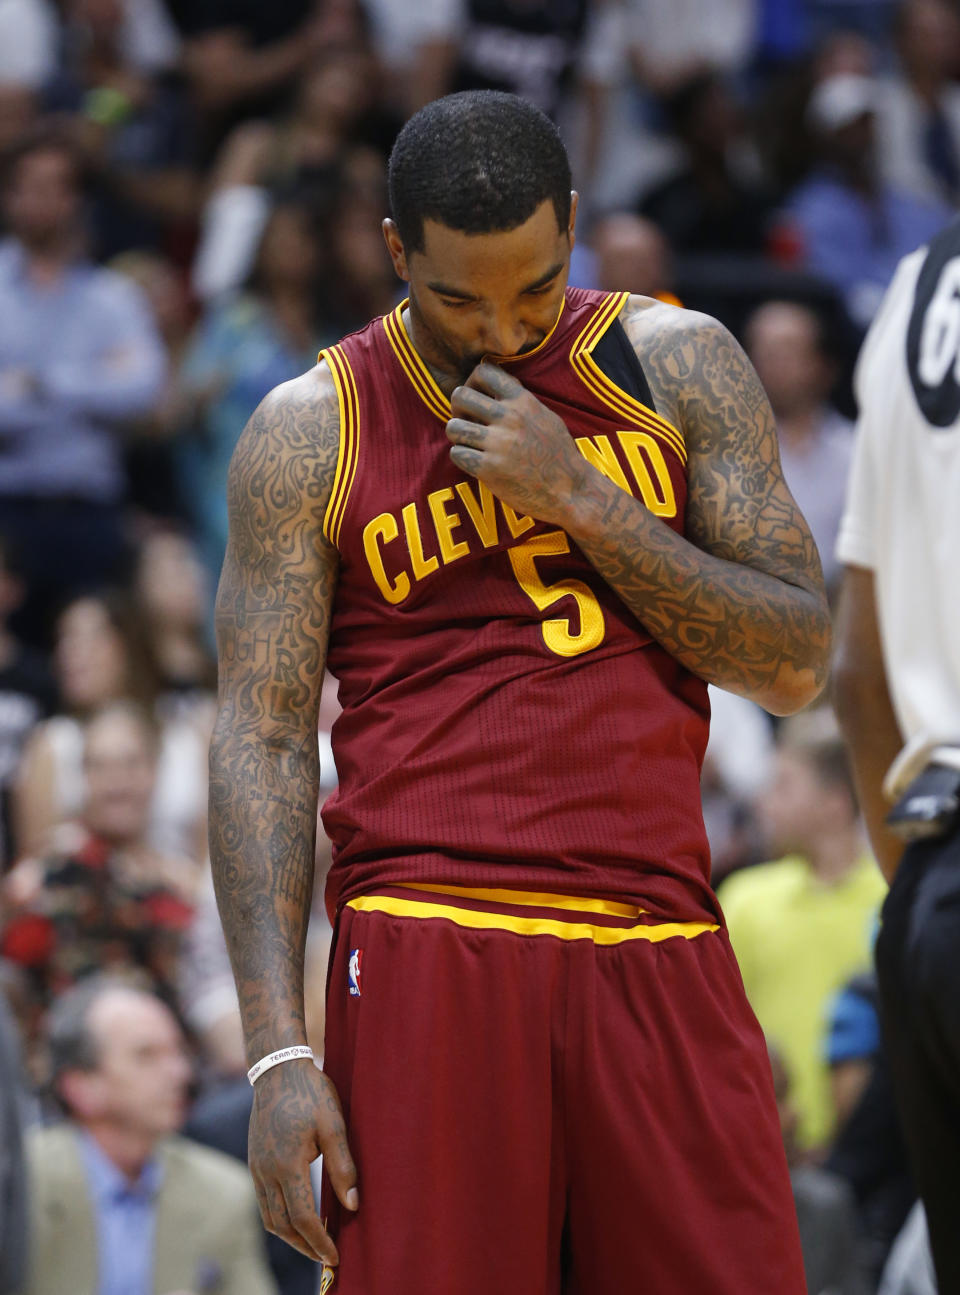 File-This April 10, 2017, file photo shows Cleveland Cavaliers guard JR Smith pausing after a play during the second half of an NBA basketball game against the Miami Heat in Miami. The Cavaliers have fallen back on excuses — some legitimate — to explain this disjointed season. Well, those don't matter now. James and the defending champs enter the playoffs staring at a possibly dangerous path. (AP Photo/Wilfredo Lee, File)